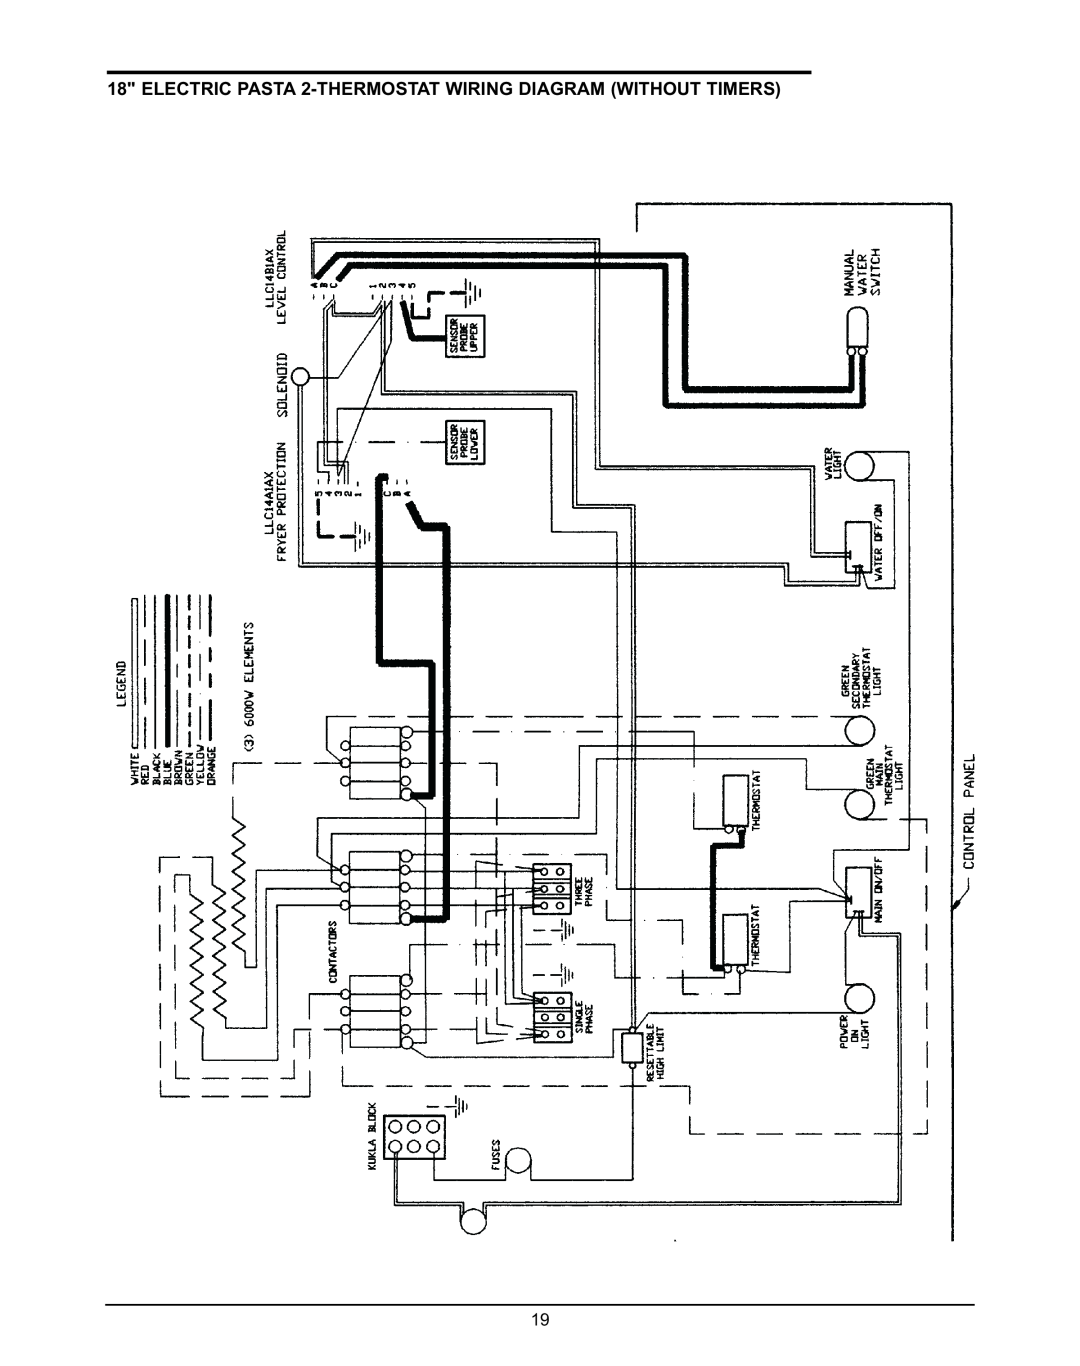 Keating Of Chicago 240V service manual ELECTRIC PASTA 2-THERMOSTAT WIRING DIAGRAM WITHOUT TIMERS 